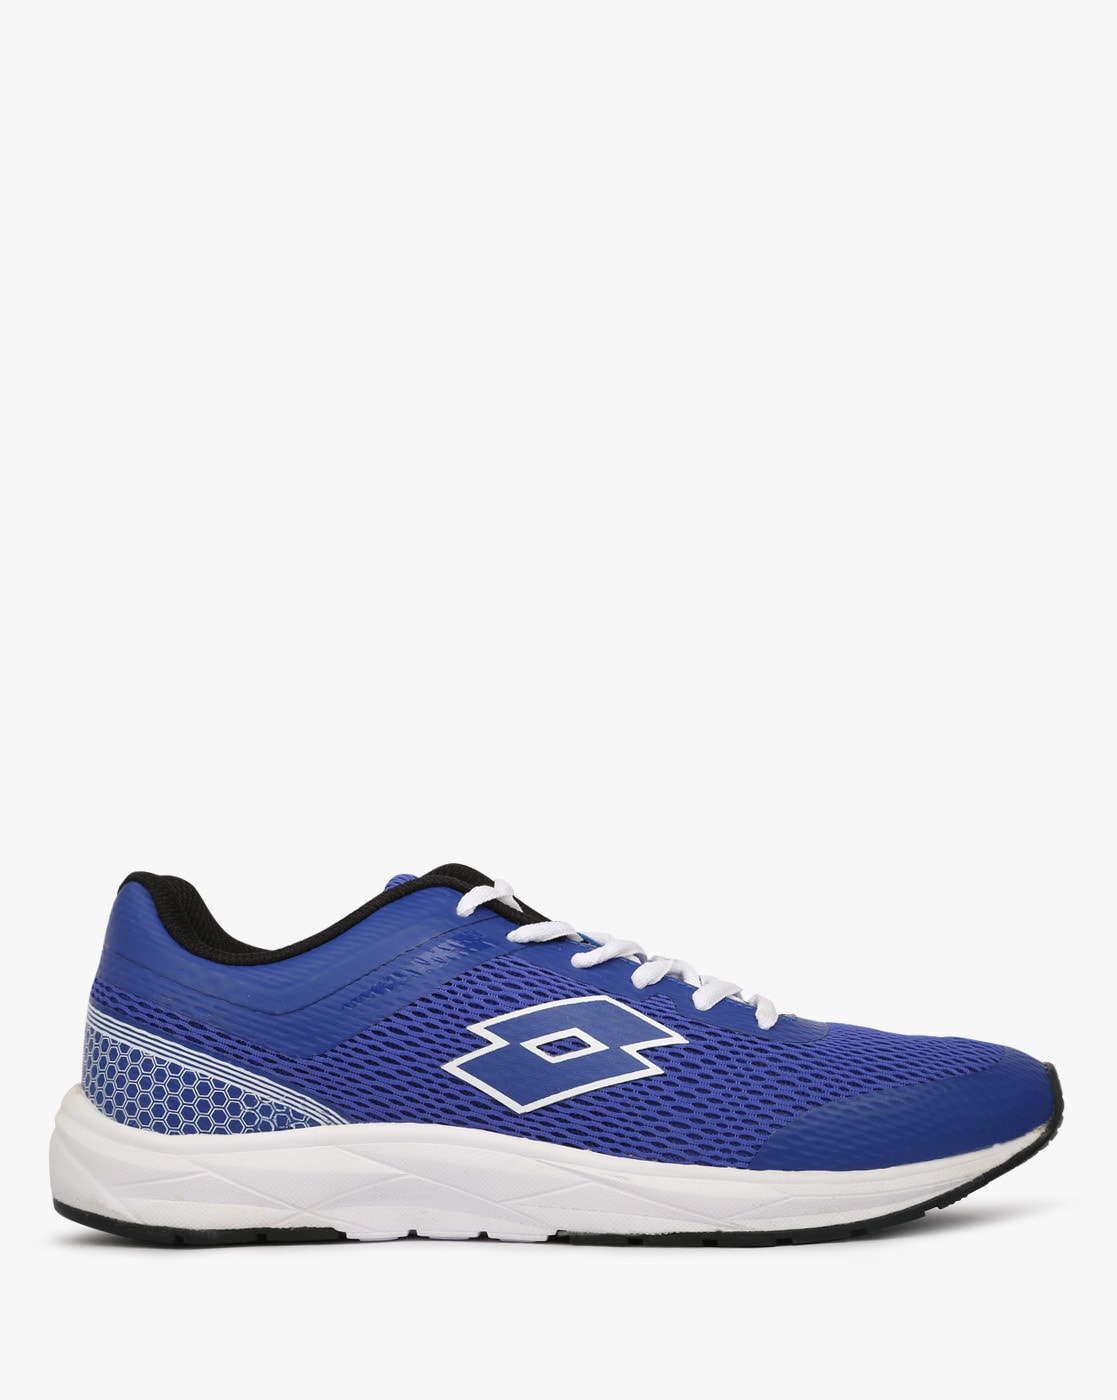 Buy Blue Sports Shoes for Men by LOTTO 